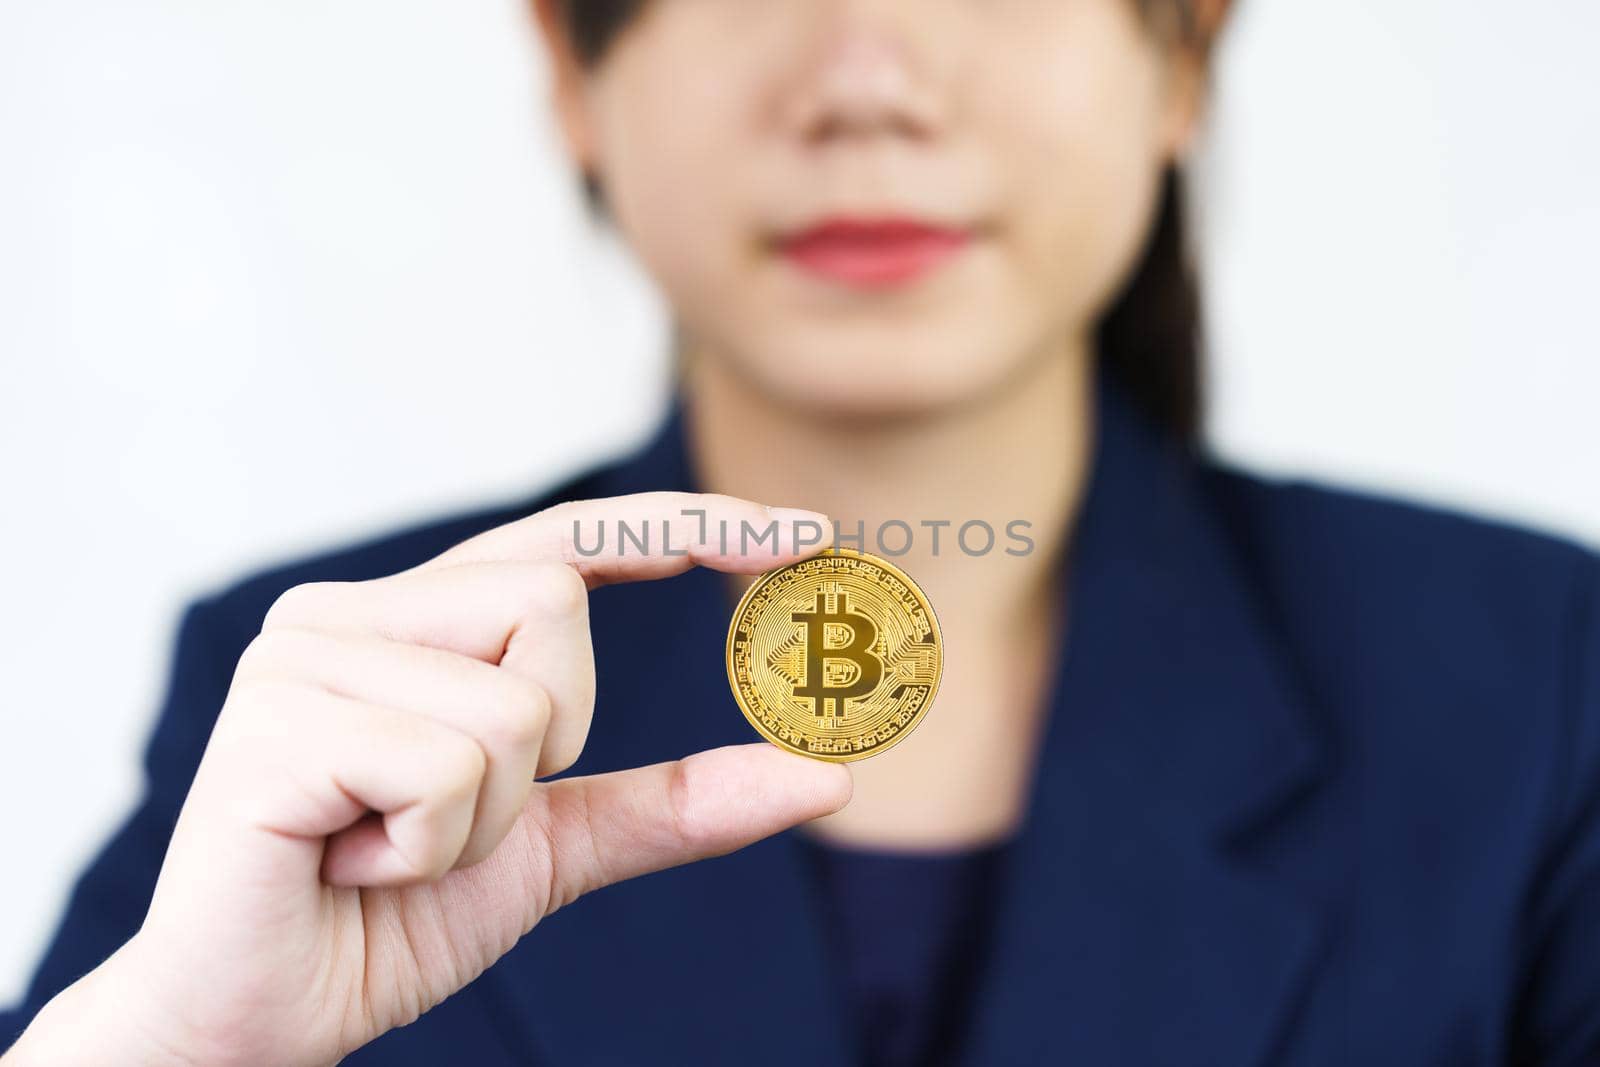 Close up of businesswoman holding some pieces of golden Bitcoin token , Bitcoin is one of the popular cryptocurrency